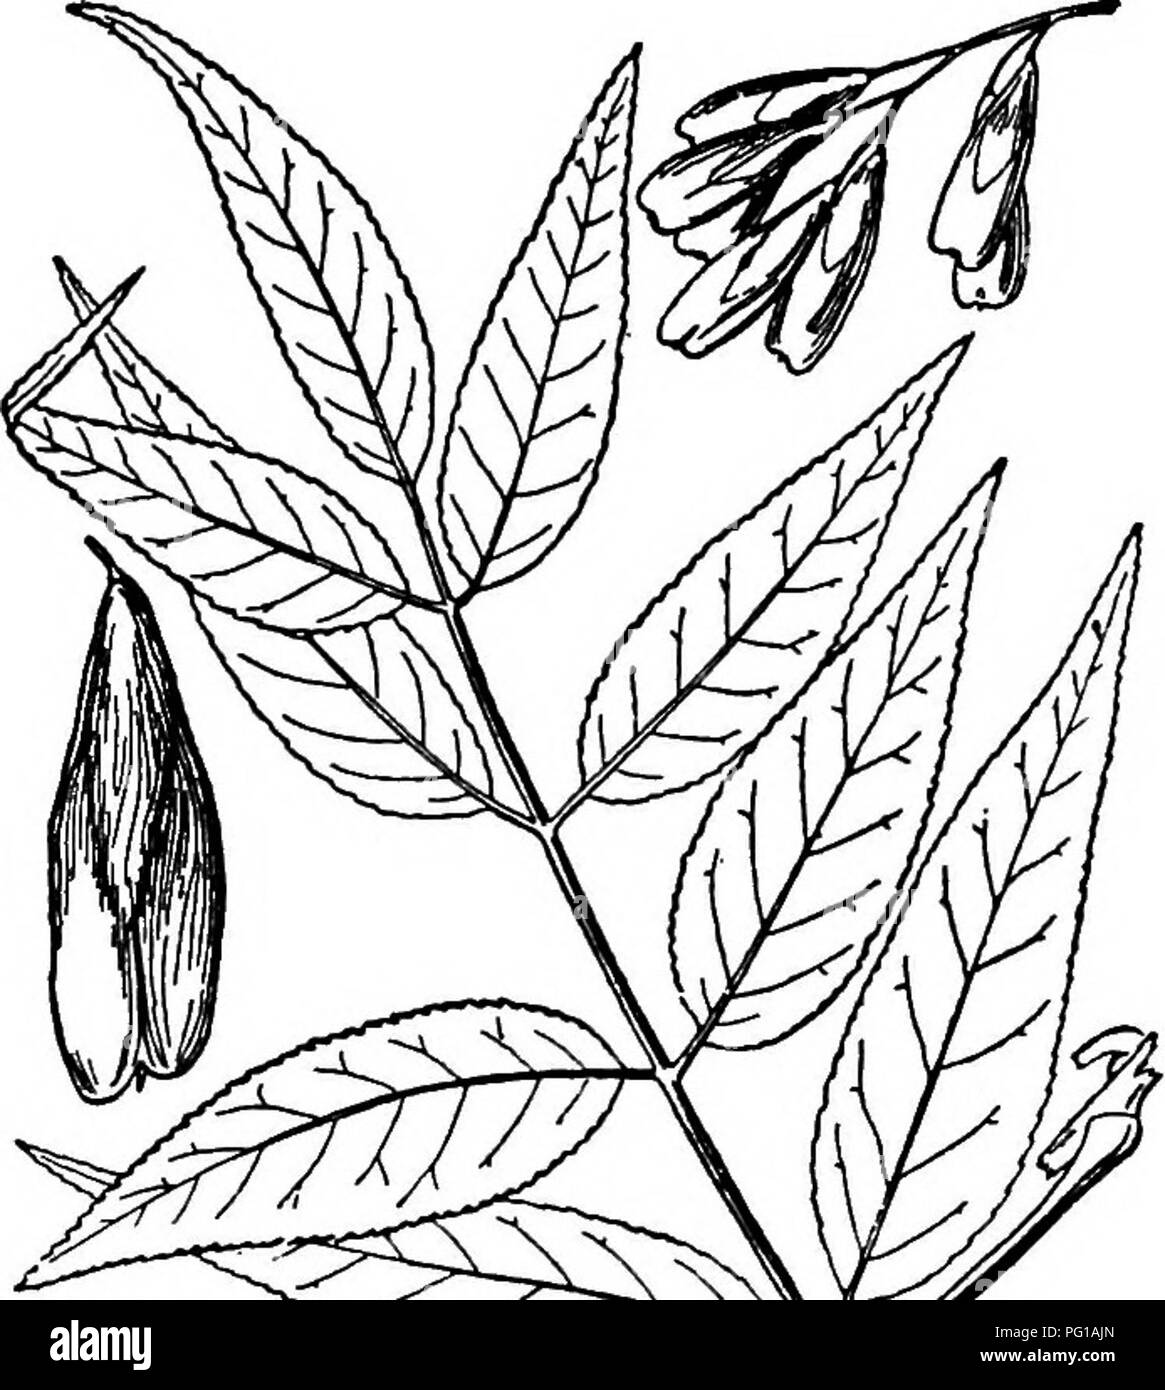 . North American trees : being descriptions and illustrations of the trees growing independently of cultivation in North America, north of Mexico and the West Indies . Trees. 8oo The Ashes calyx. The samaras are spatulate, averaging about 3 cm. long, the blunt or little notched wing decurrent upon the narrowly conic seed-bearing part to its mid- dle or below. The wood is similar to that of the Red ash, and is used for similar purposes. The type specimen was collected by Rev. J. M. Bates at Long Pine, Nebraska, Aug. 9, 1897. 6. BLUE ASHâFrazmus quadrangulata Michaux This, the most slender of th Stock Photo